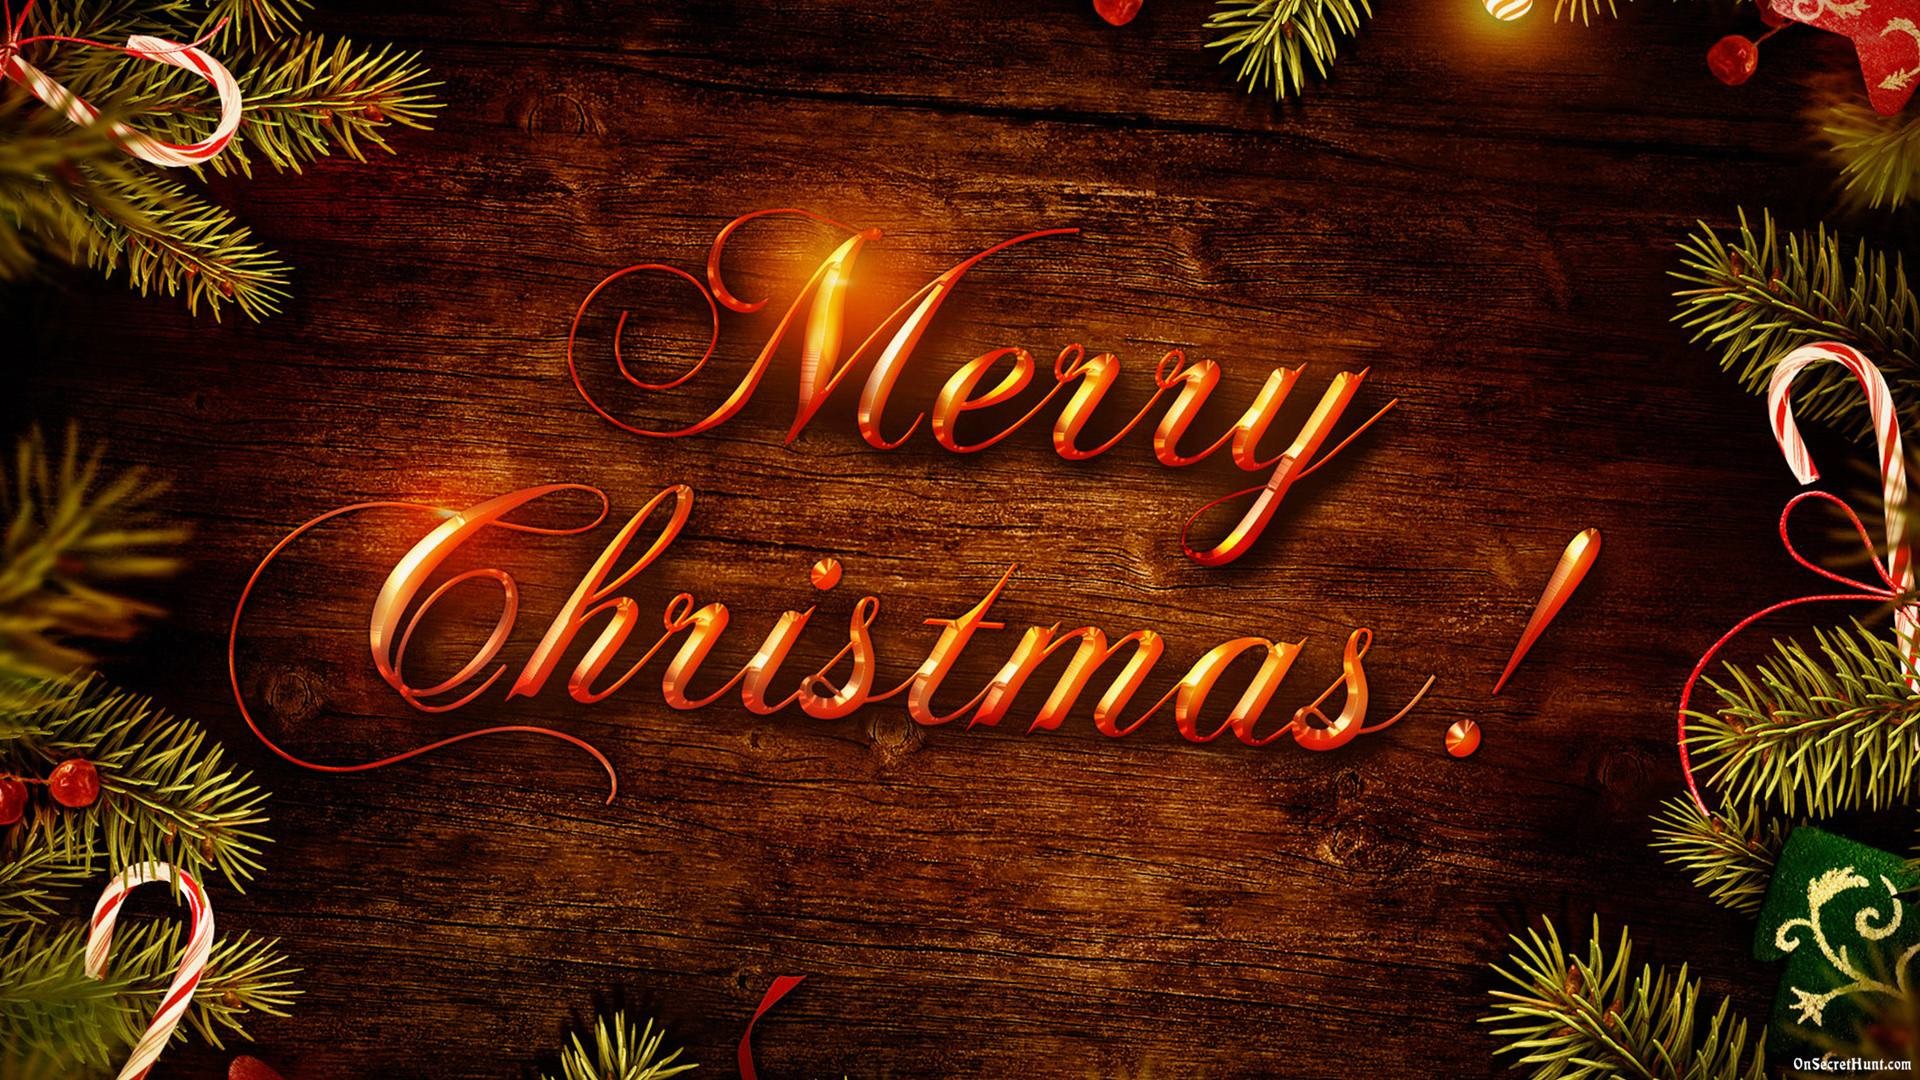 1920x1080 Merry Christmas Wishes Wallpapers funny pics